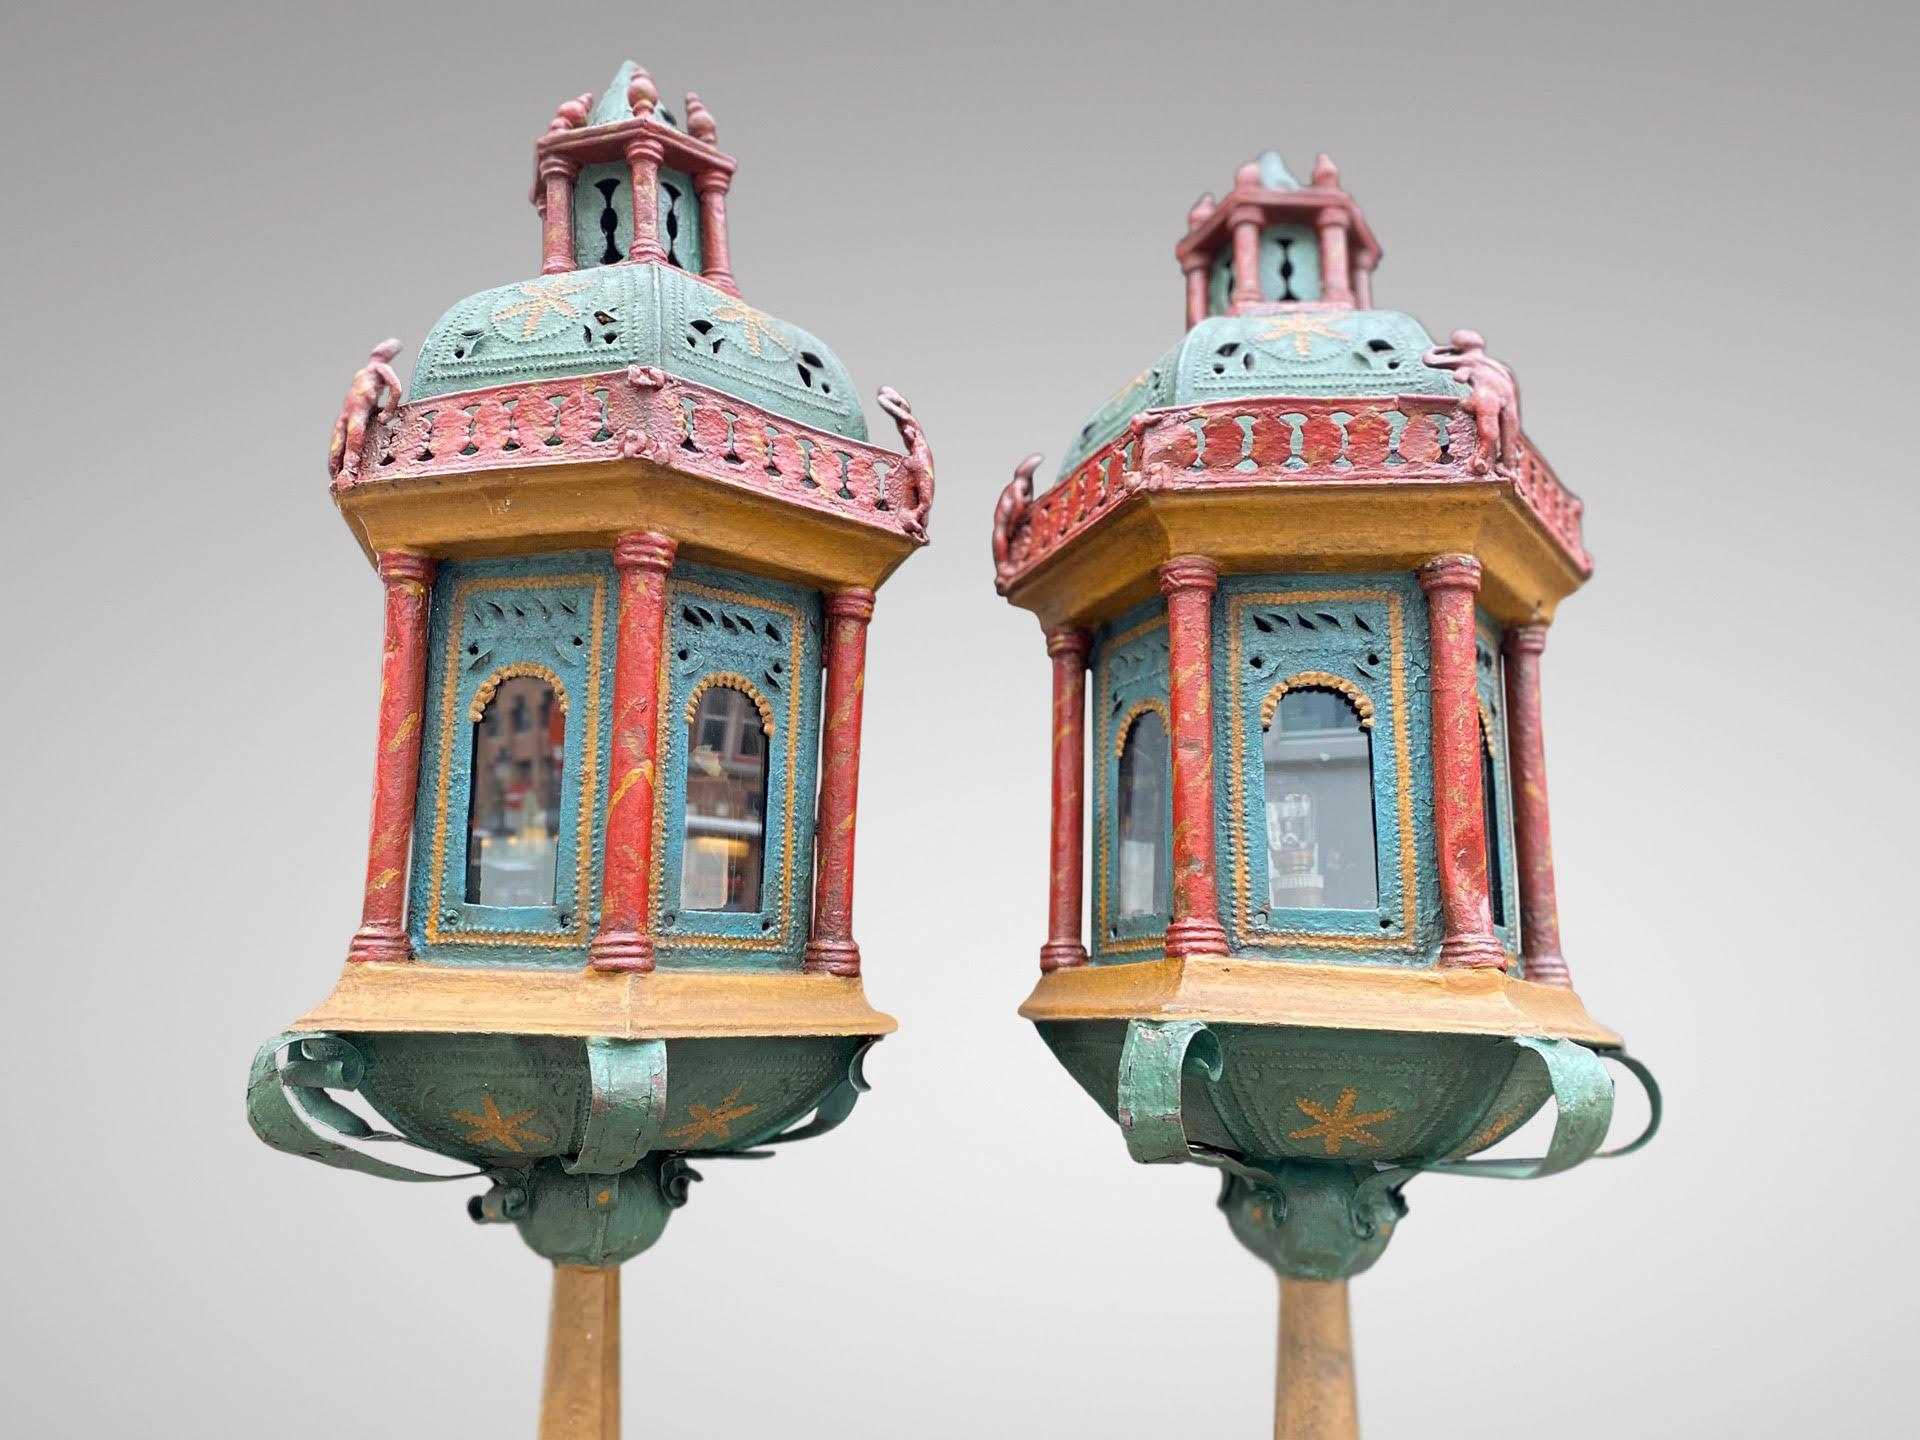 Fabulous Pair of Venetian Gondola Lantern Torchères In Good Condition In Petworth,West Sussex, GB